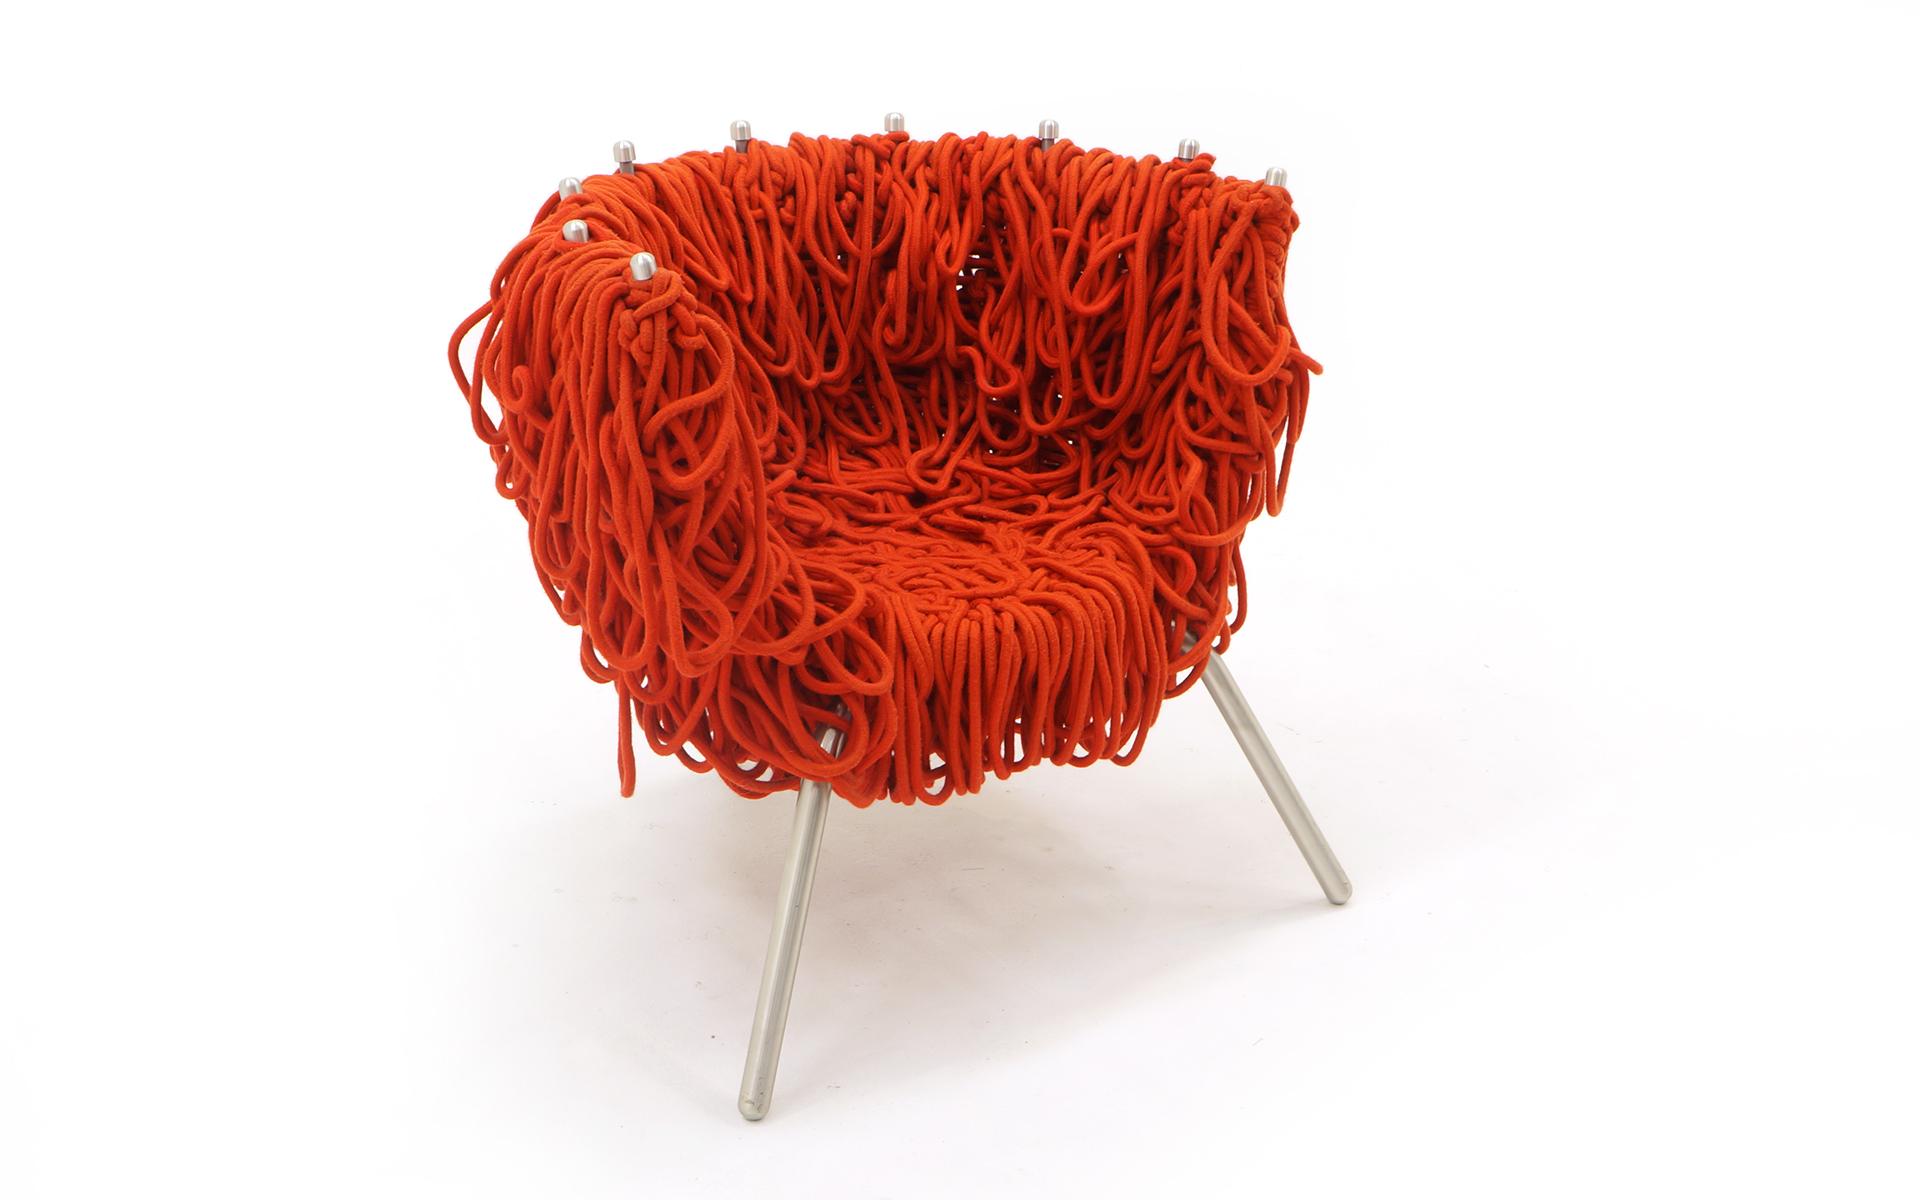 Rare Vermelha chair by Fernando and Humberto Campana for Edra. Red rope covers the powder coated steel and aluminum frame. Very good condition.
Brothers, Fernando (born 1961) and Humberto (born 1953) founded Estudio Campana in 1983 and quickly